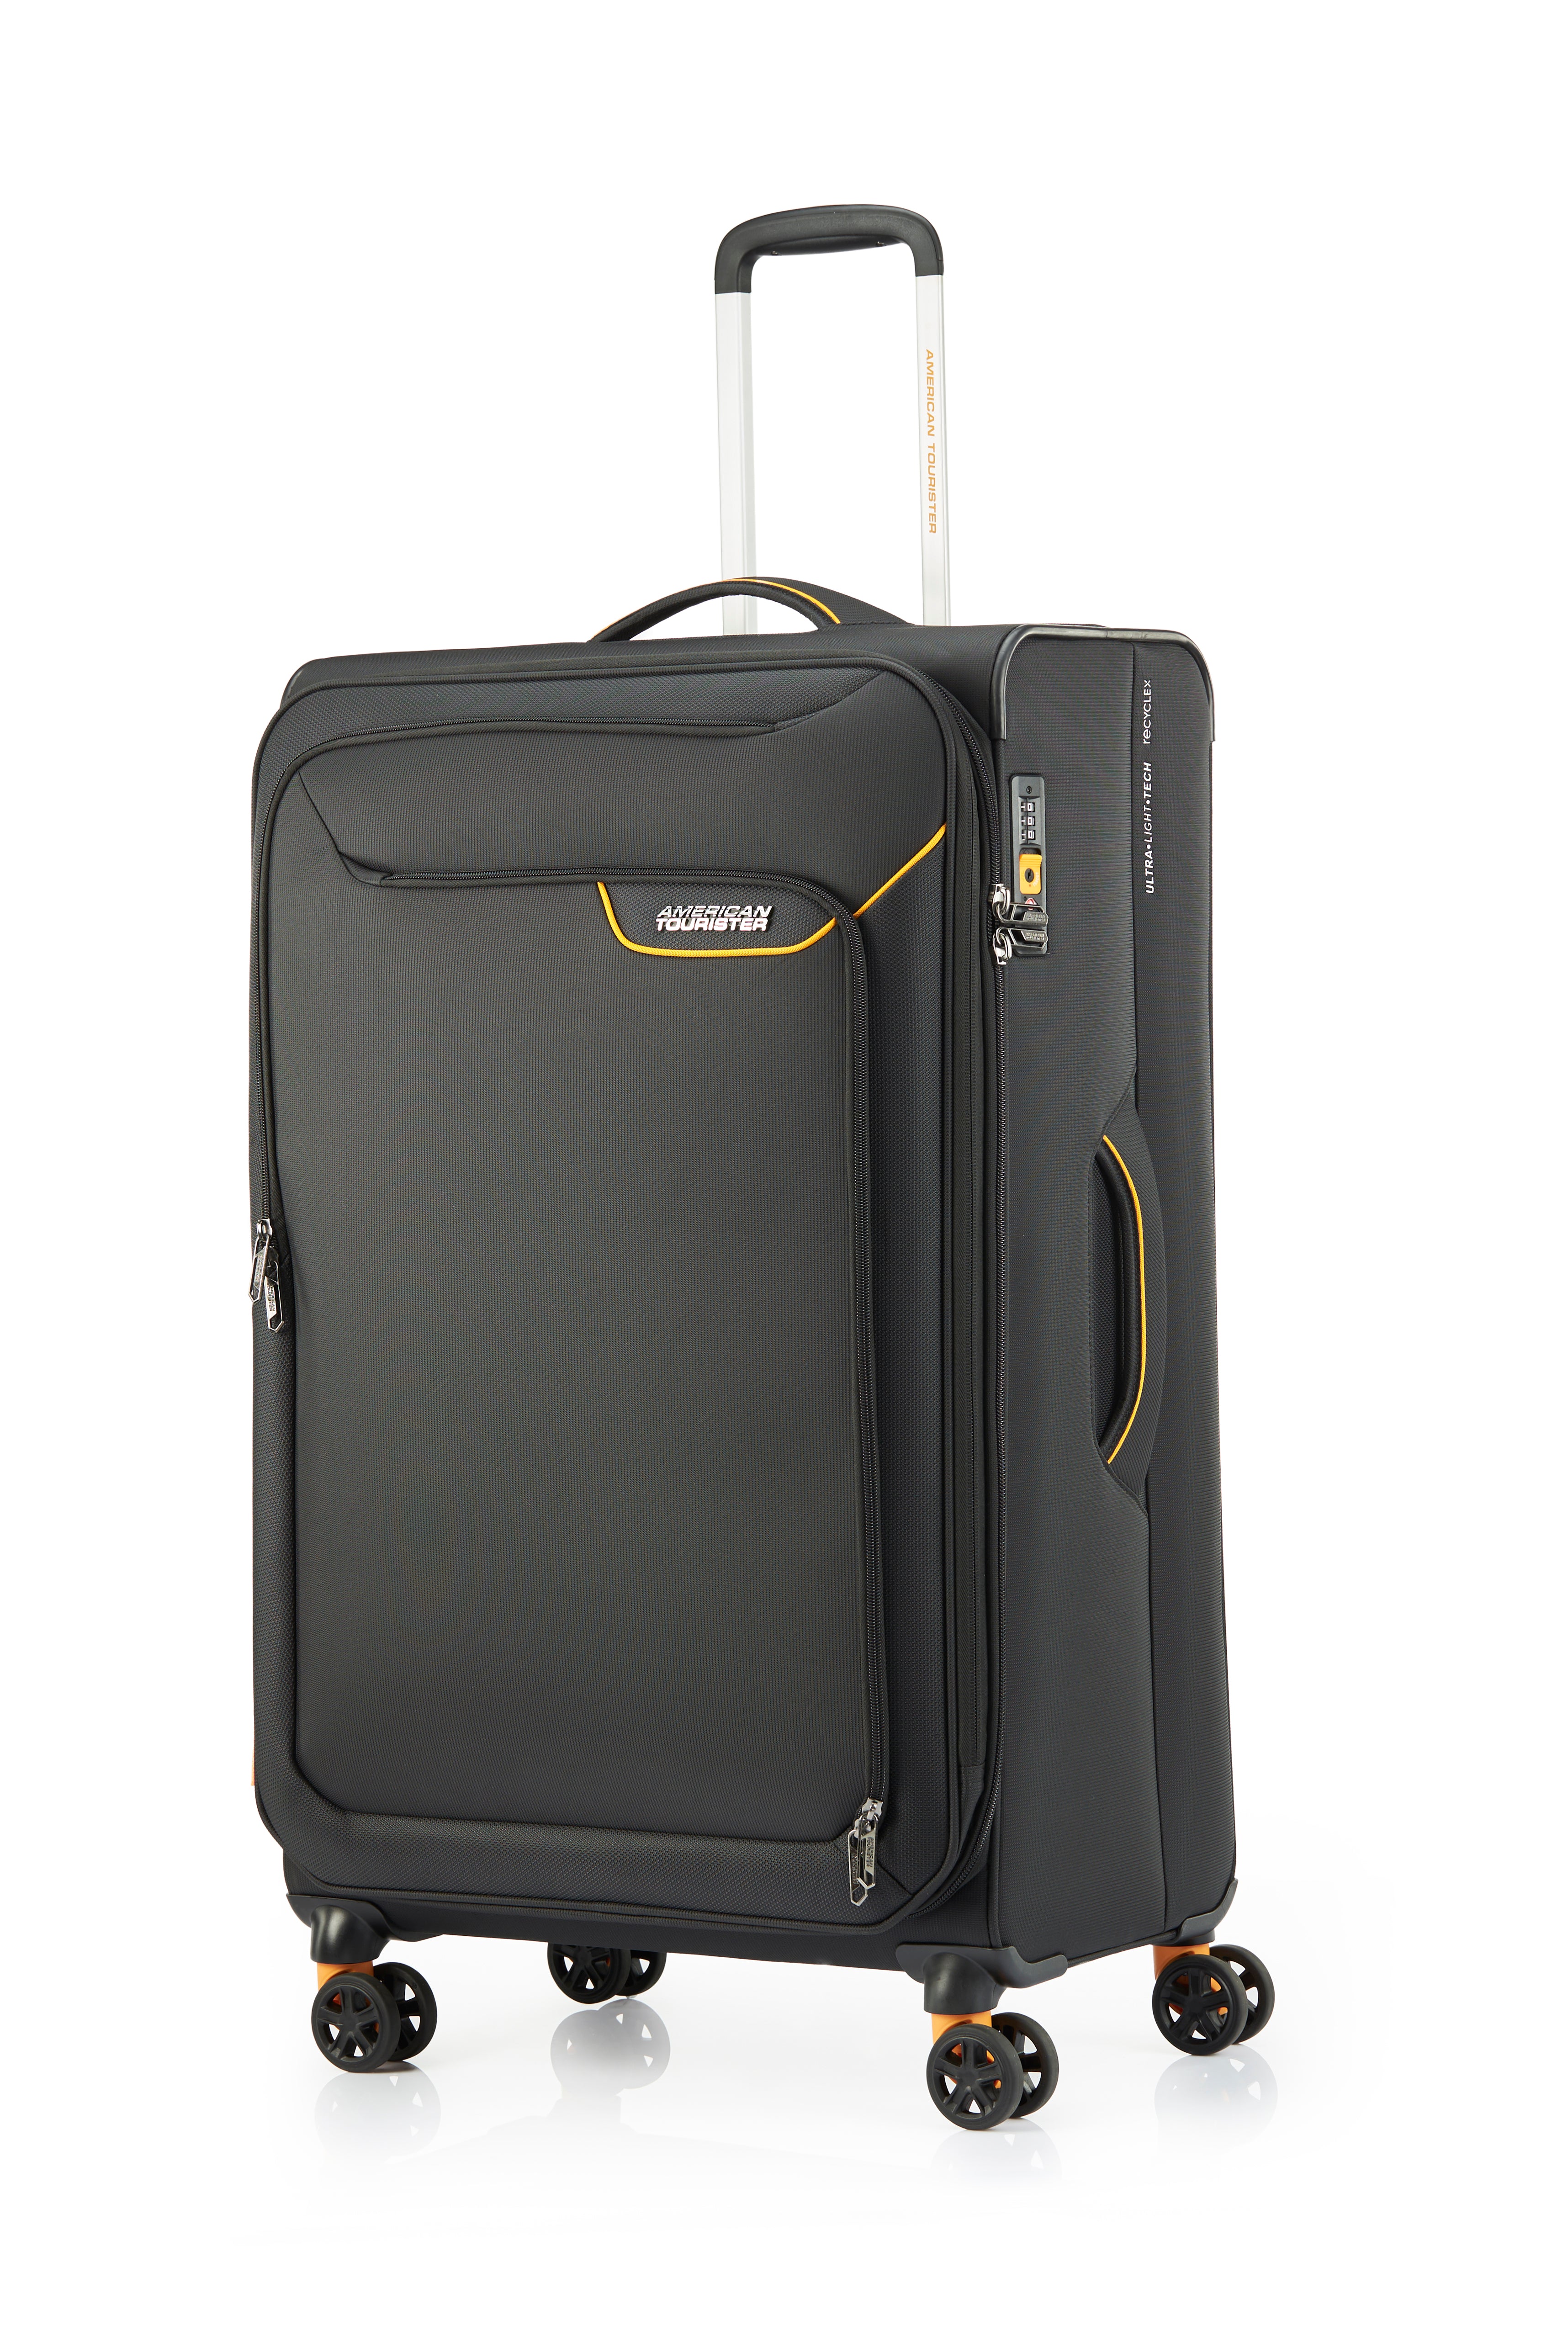 American Tourister - Applite ECO 82cm Large Suitcase - Black/Must-1